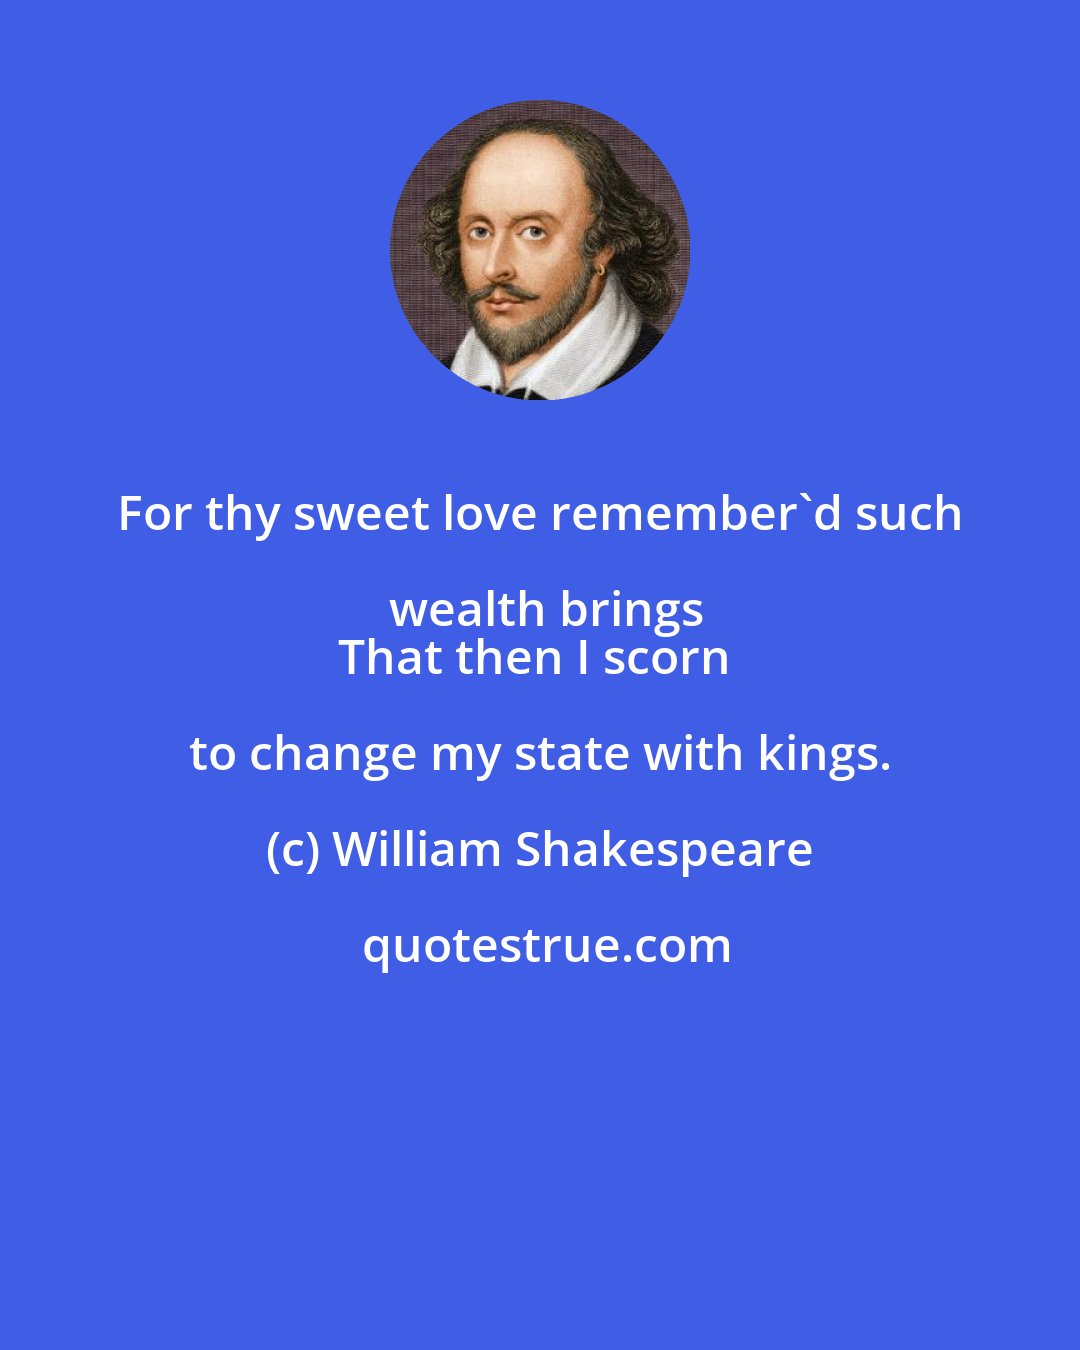 William Shakespeare: For thy sweet love remember'd such wealth brings
That then I scorn to change my state with kings.